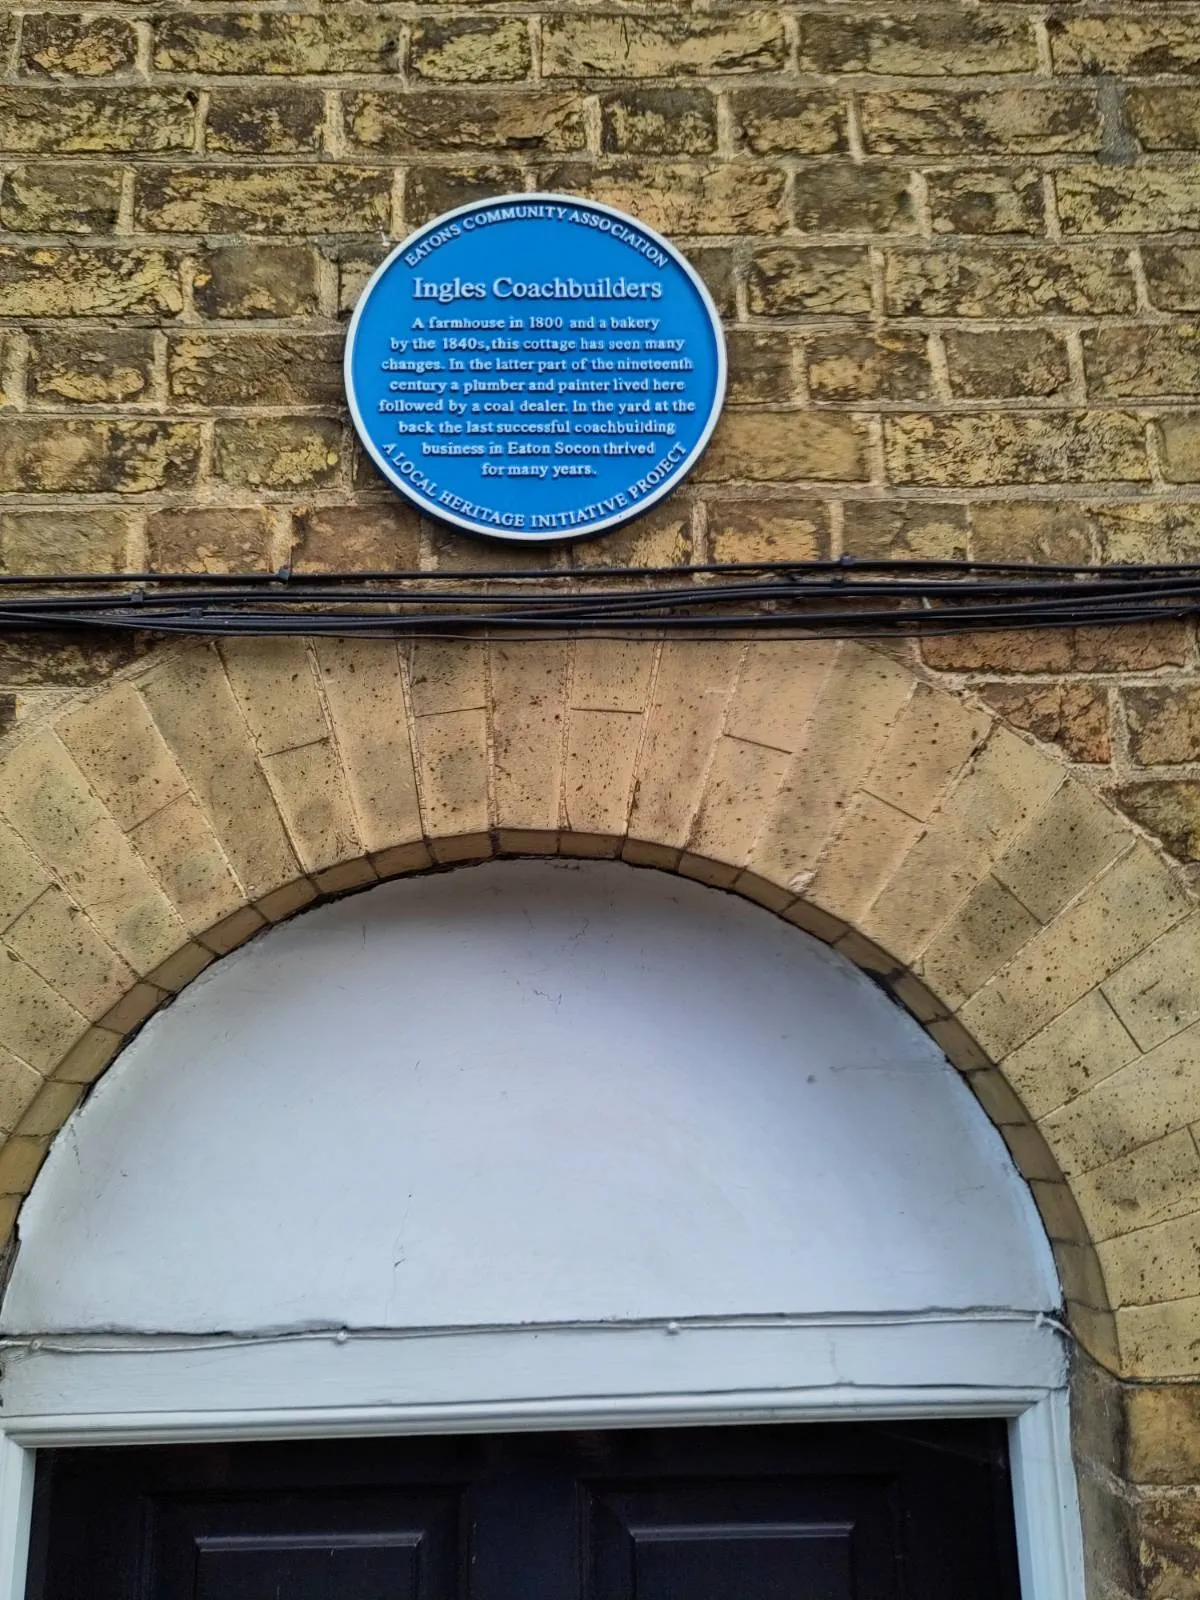 Photo showing: Plaque for former Ingles Coachbuilders on 200 Great North Road, Eaton Socon, St Neots. It reads "Ingles Coachbuilders A farmhouse in 1800 and a bakery by the 1840s, this cottage has seen many changes. In the latter part of the nineteenth century a plumber and painter lived here followed by a coal dealer. In the yard at the back the last successful coachbuilding business in Eaton Socon thrived for many years."